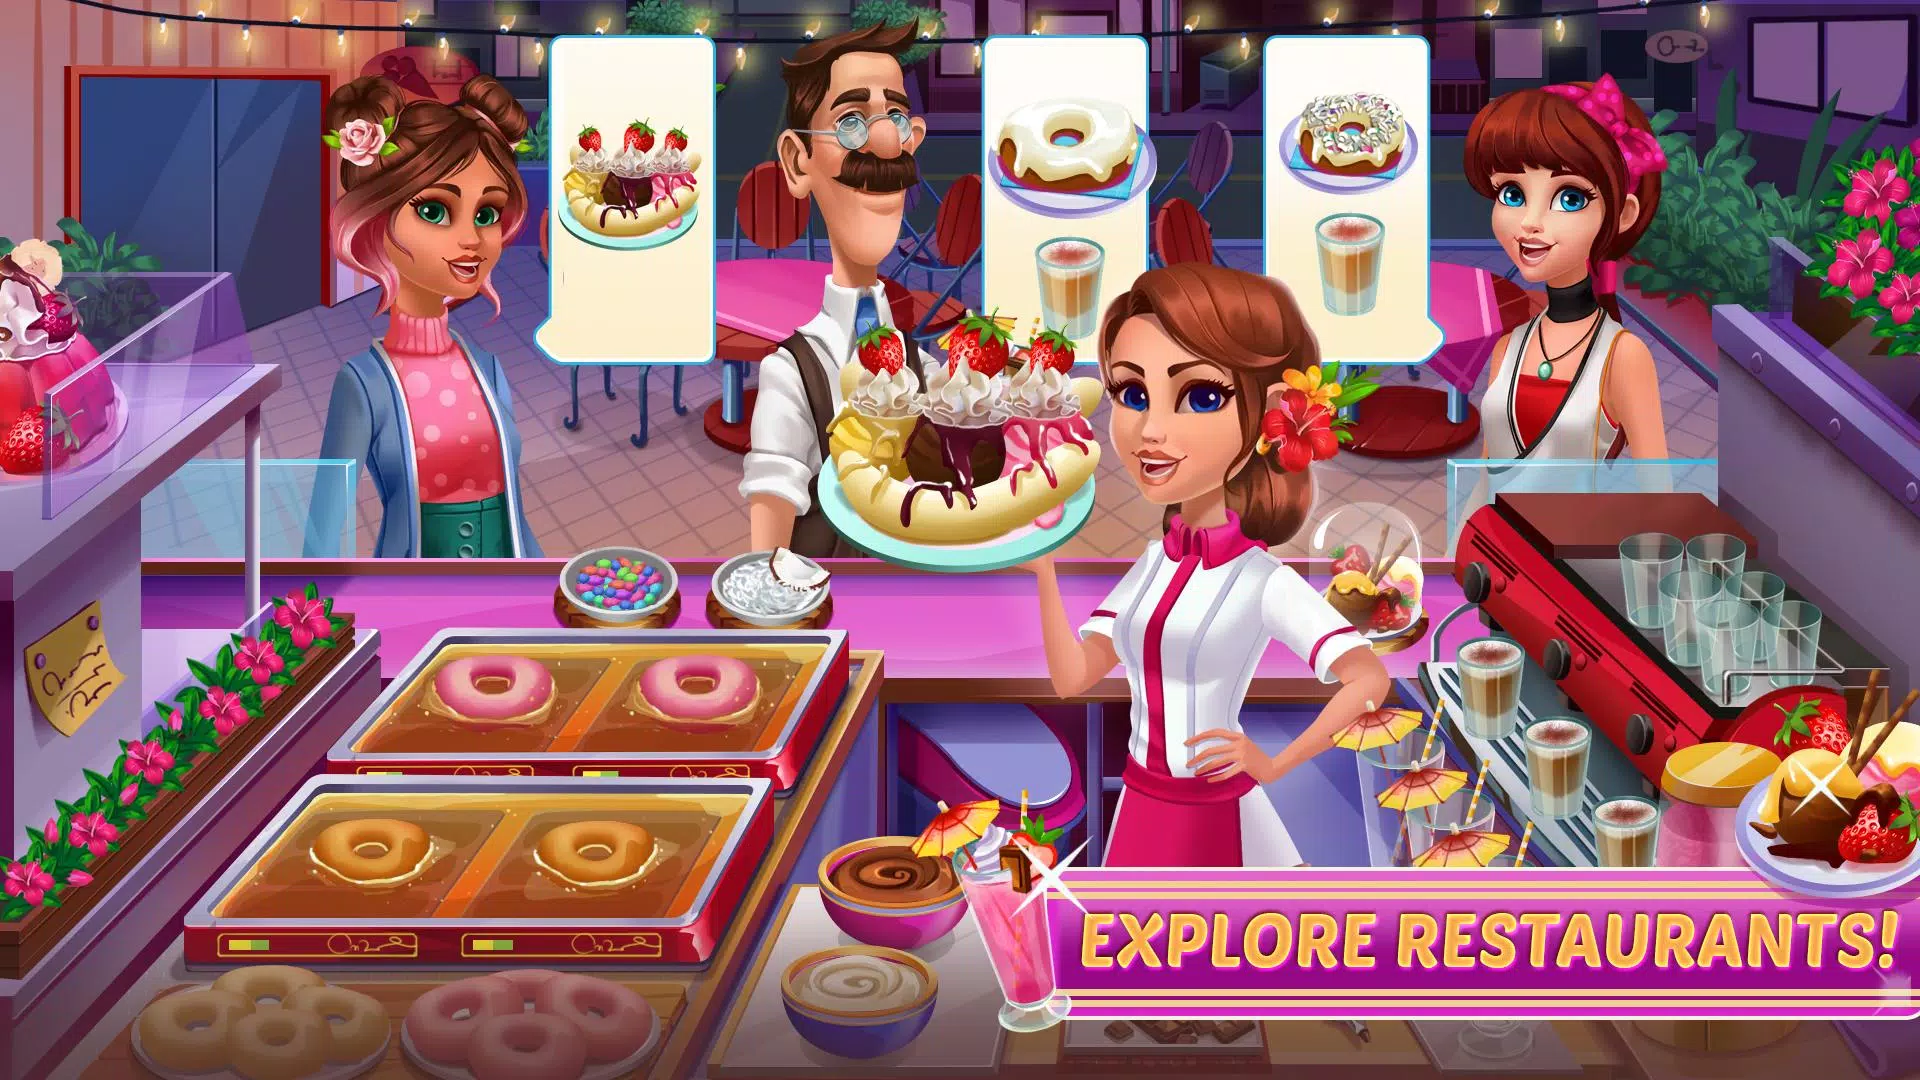 Cooking Games - Free Cooking Games For Girls